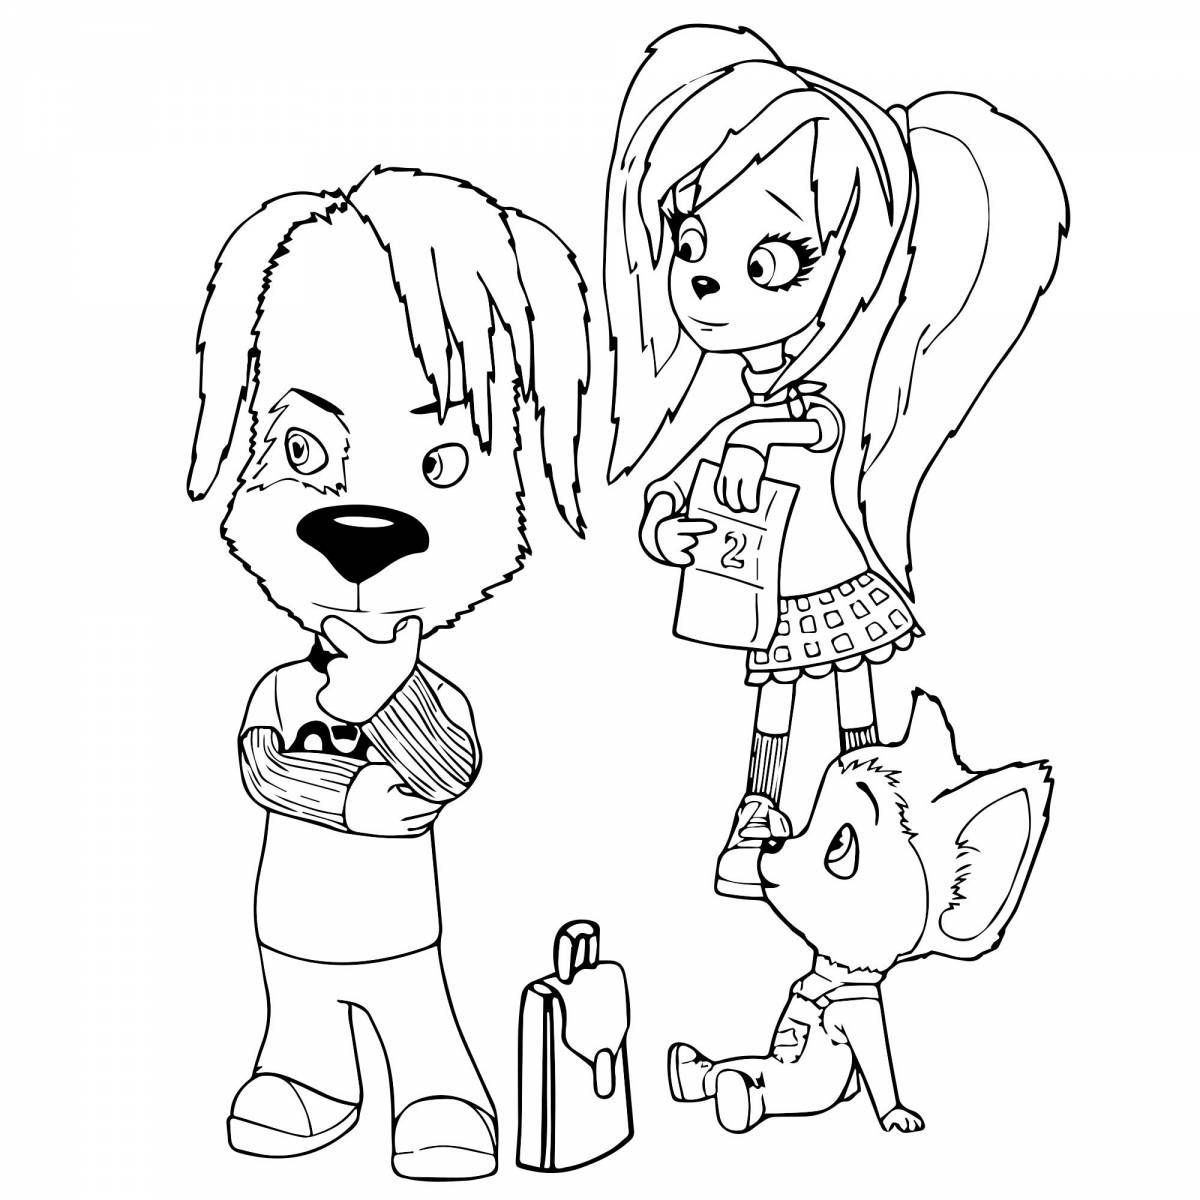 Colorful barboskin coloring pages for kids